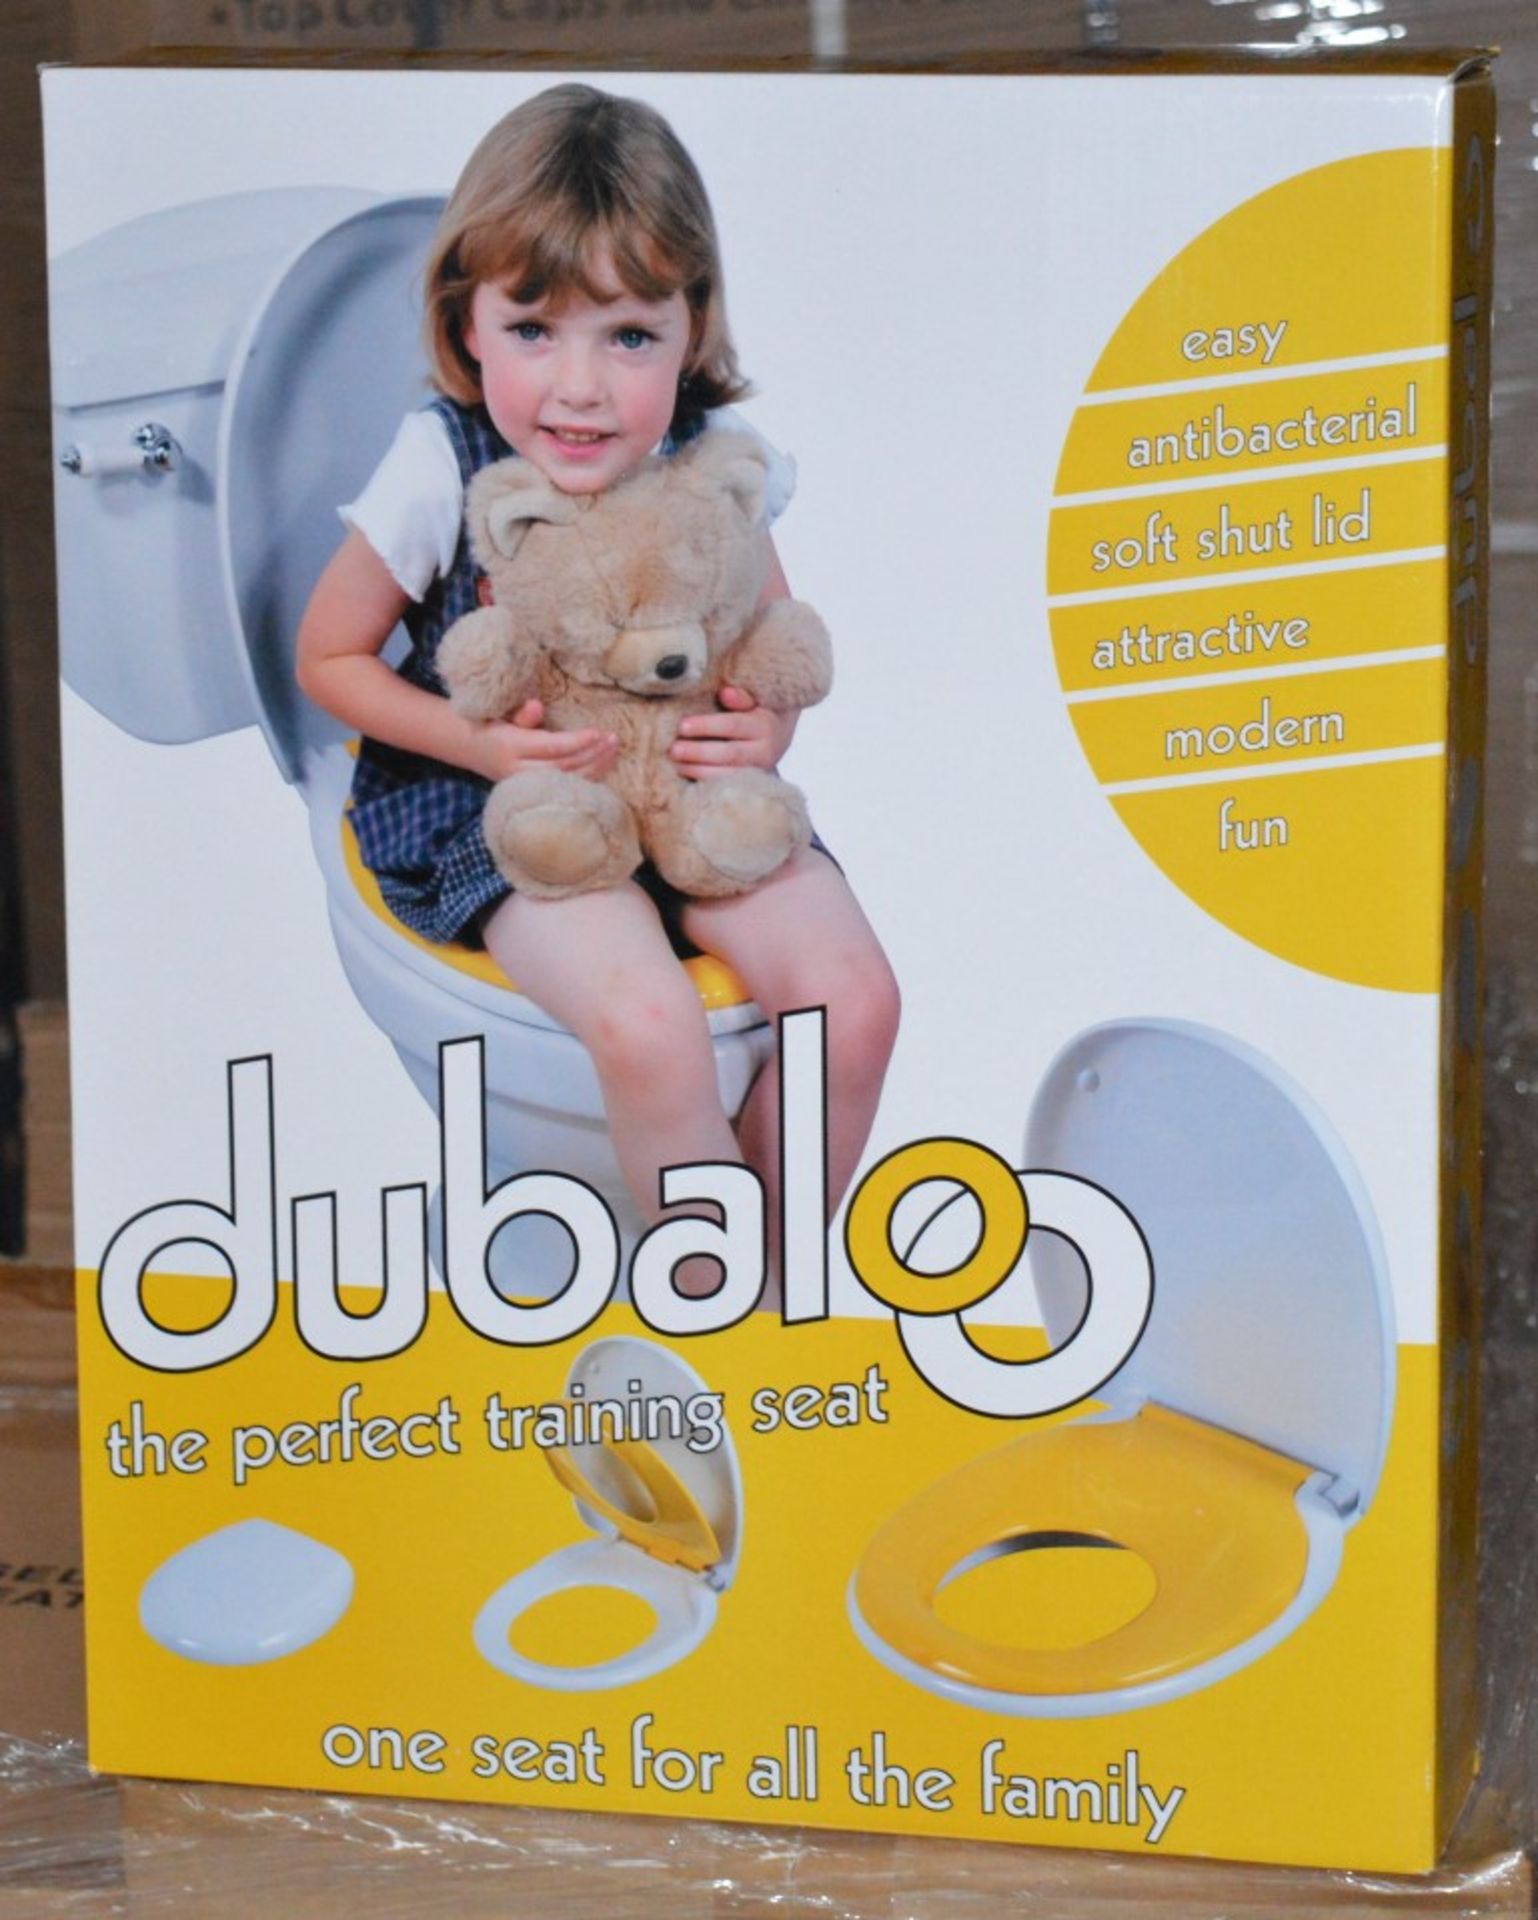 1 x Dubaloo 2 in 1 Family Training Toilet Seat - One Seat For All The Family - Full Size Toilet Seat